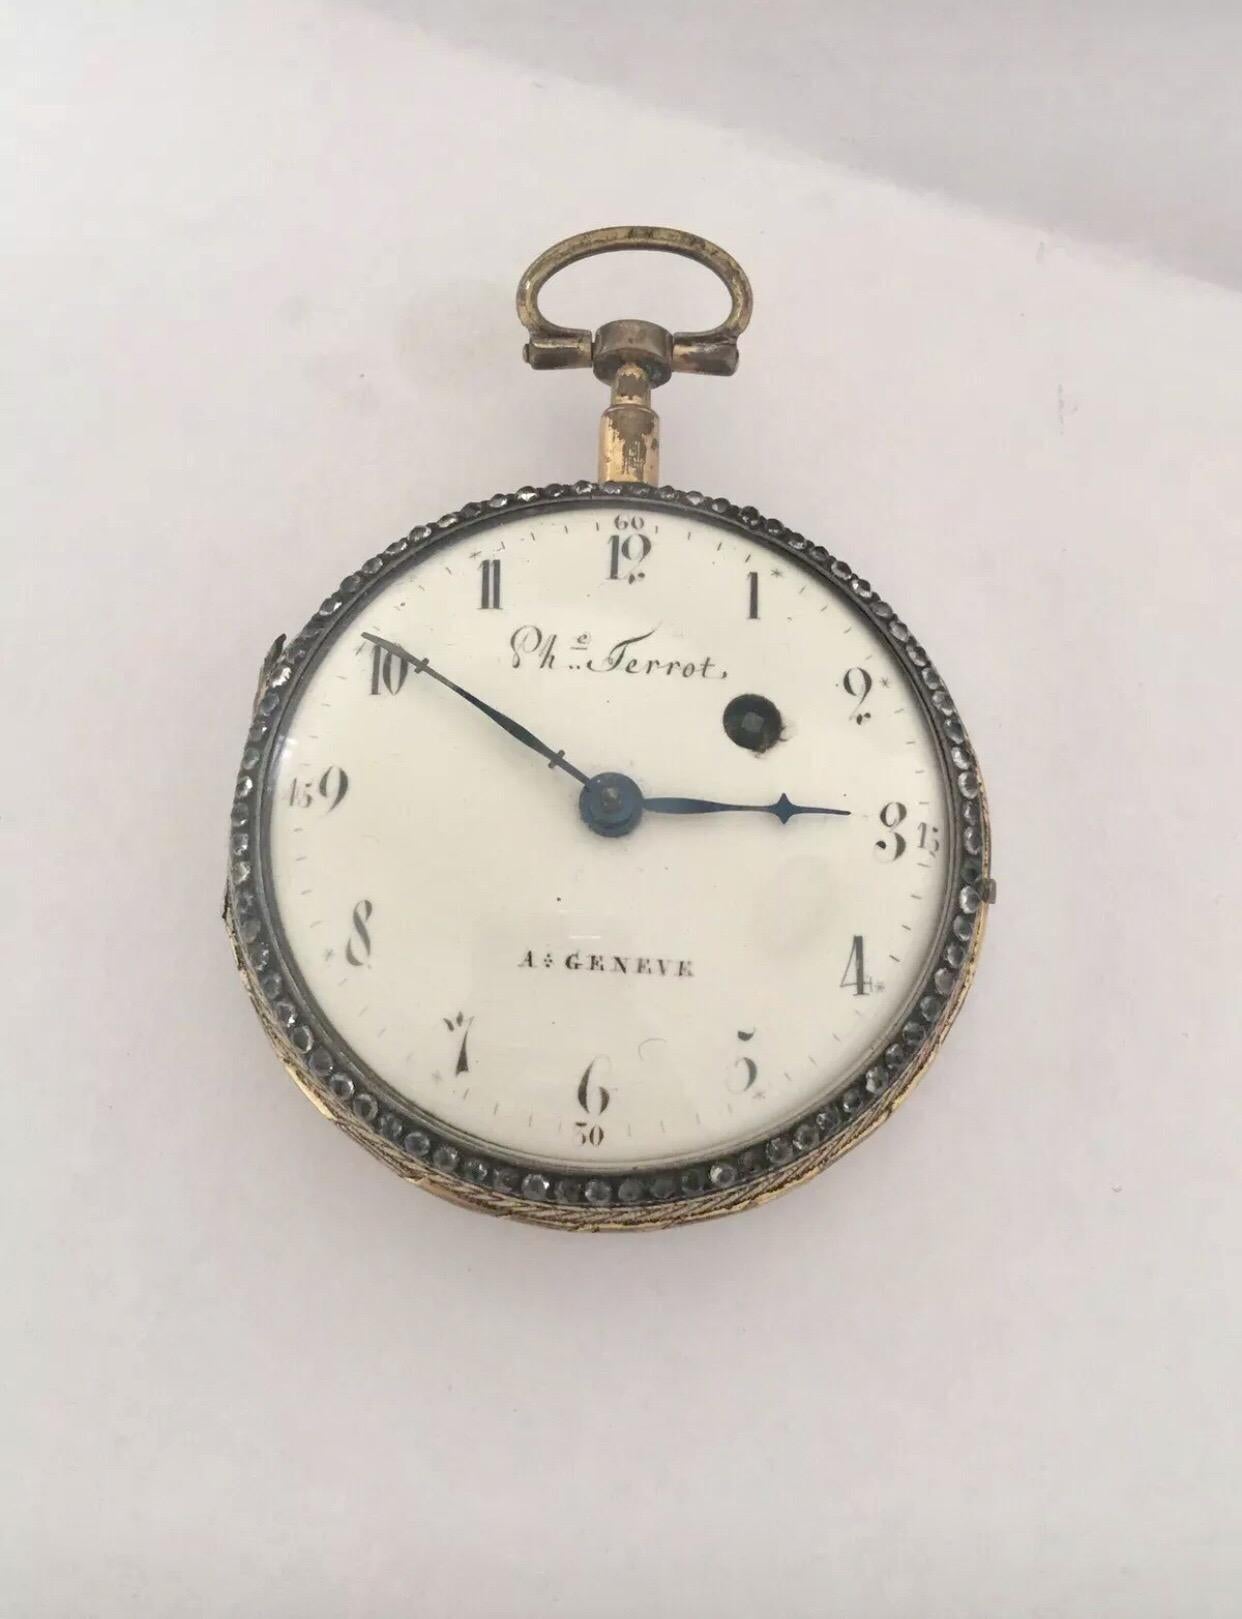 
An Early Verge ,Fusee, Red Enamel Gold Pocket Watch Signed Philipe Terrot, A Geneve.


This beautiful 54mm case diameter watch is in good working condition and is running well. Visible signs of wearing and tear with the white enamel dial shown a